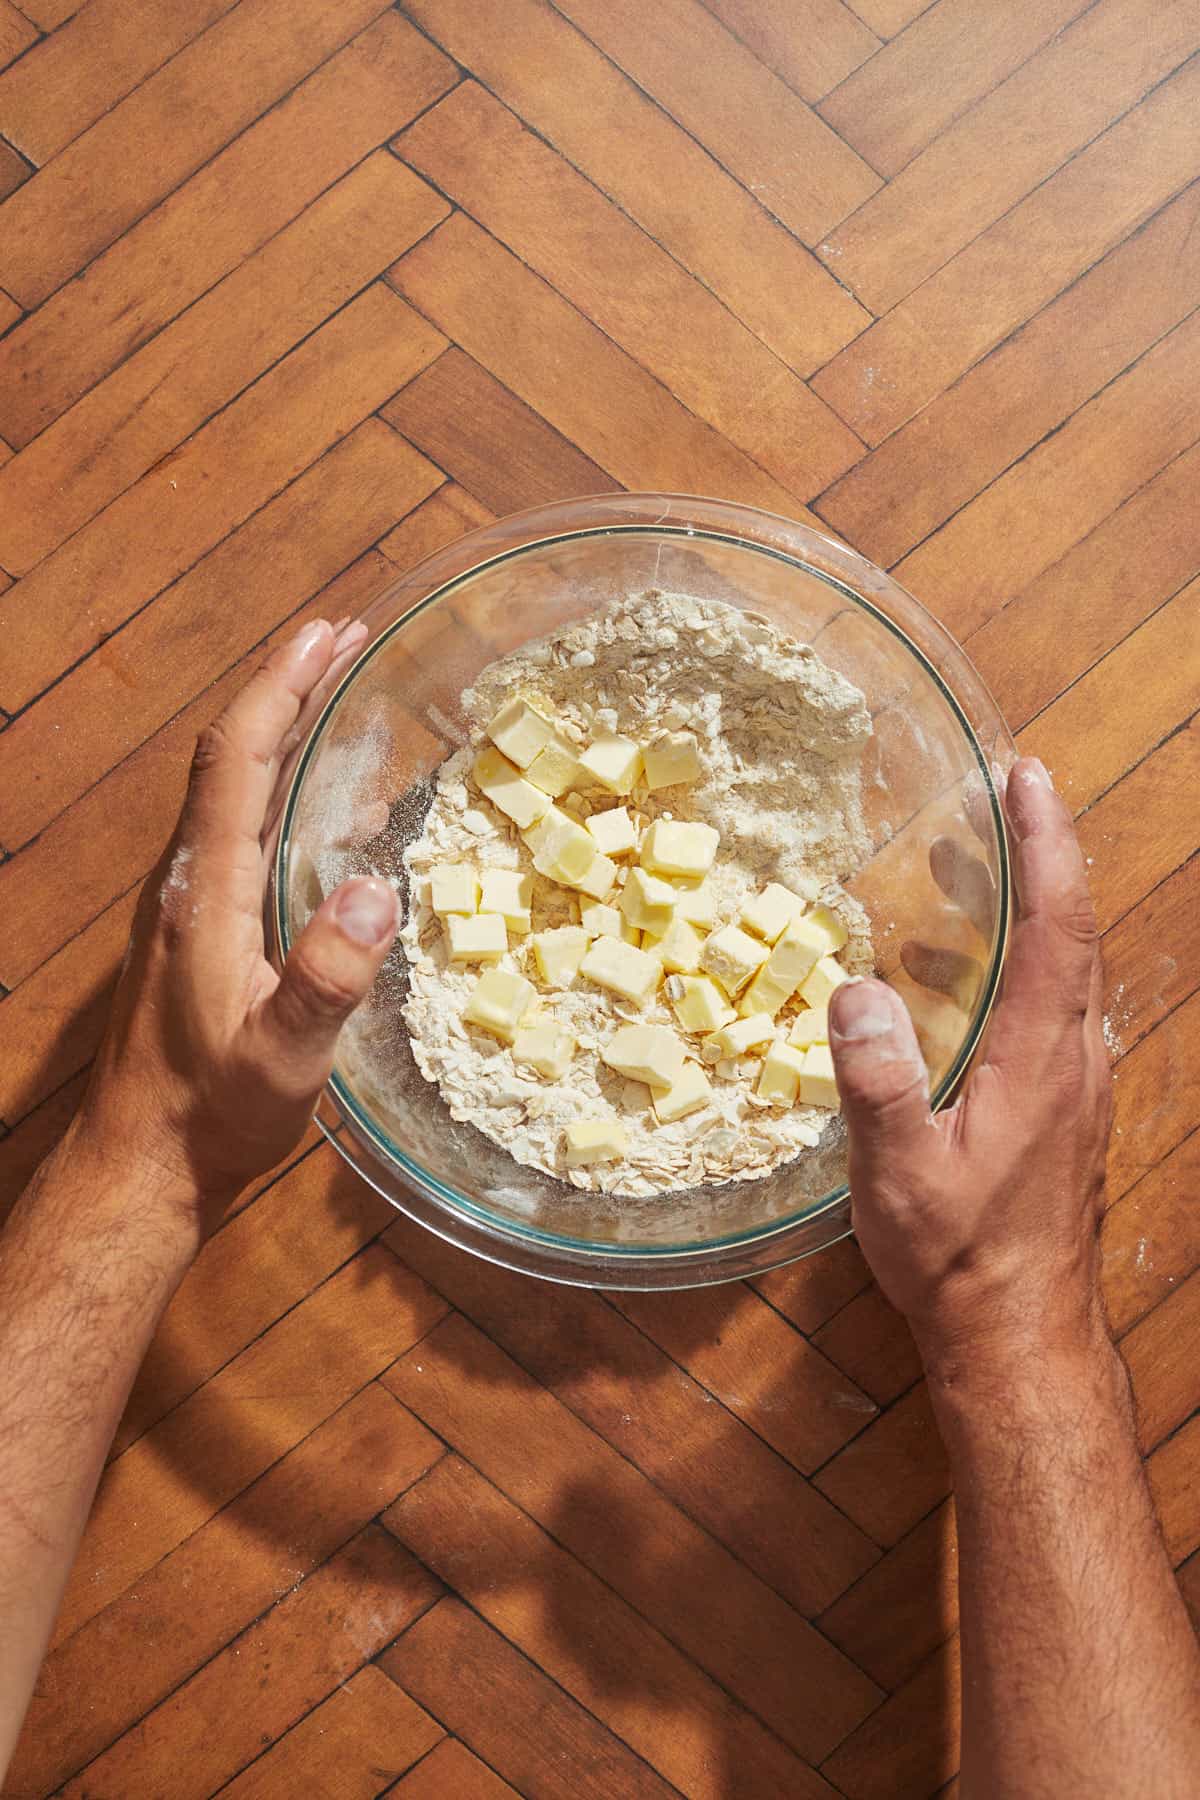 cubed butter pieces being added to the bowl of dry ingredients